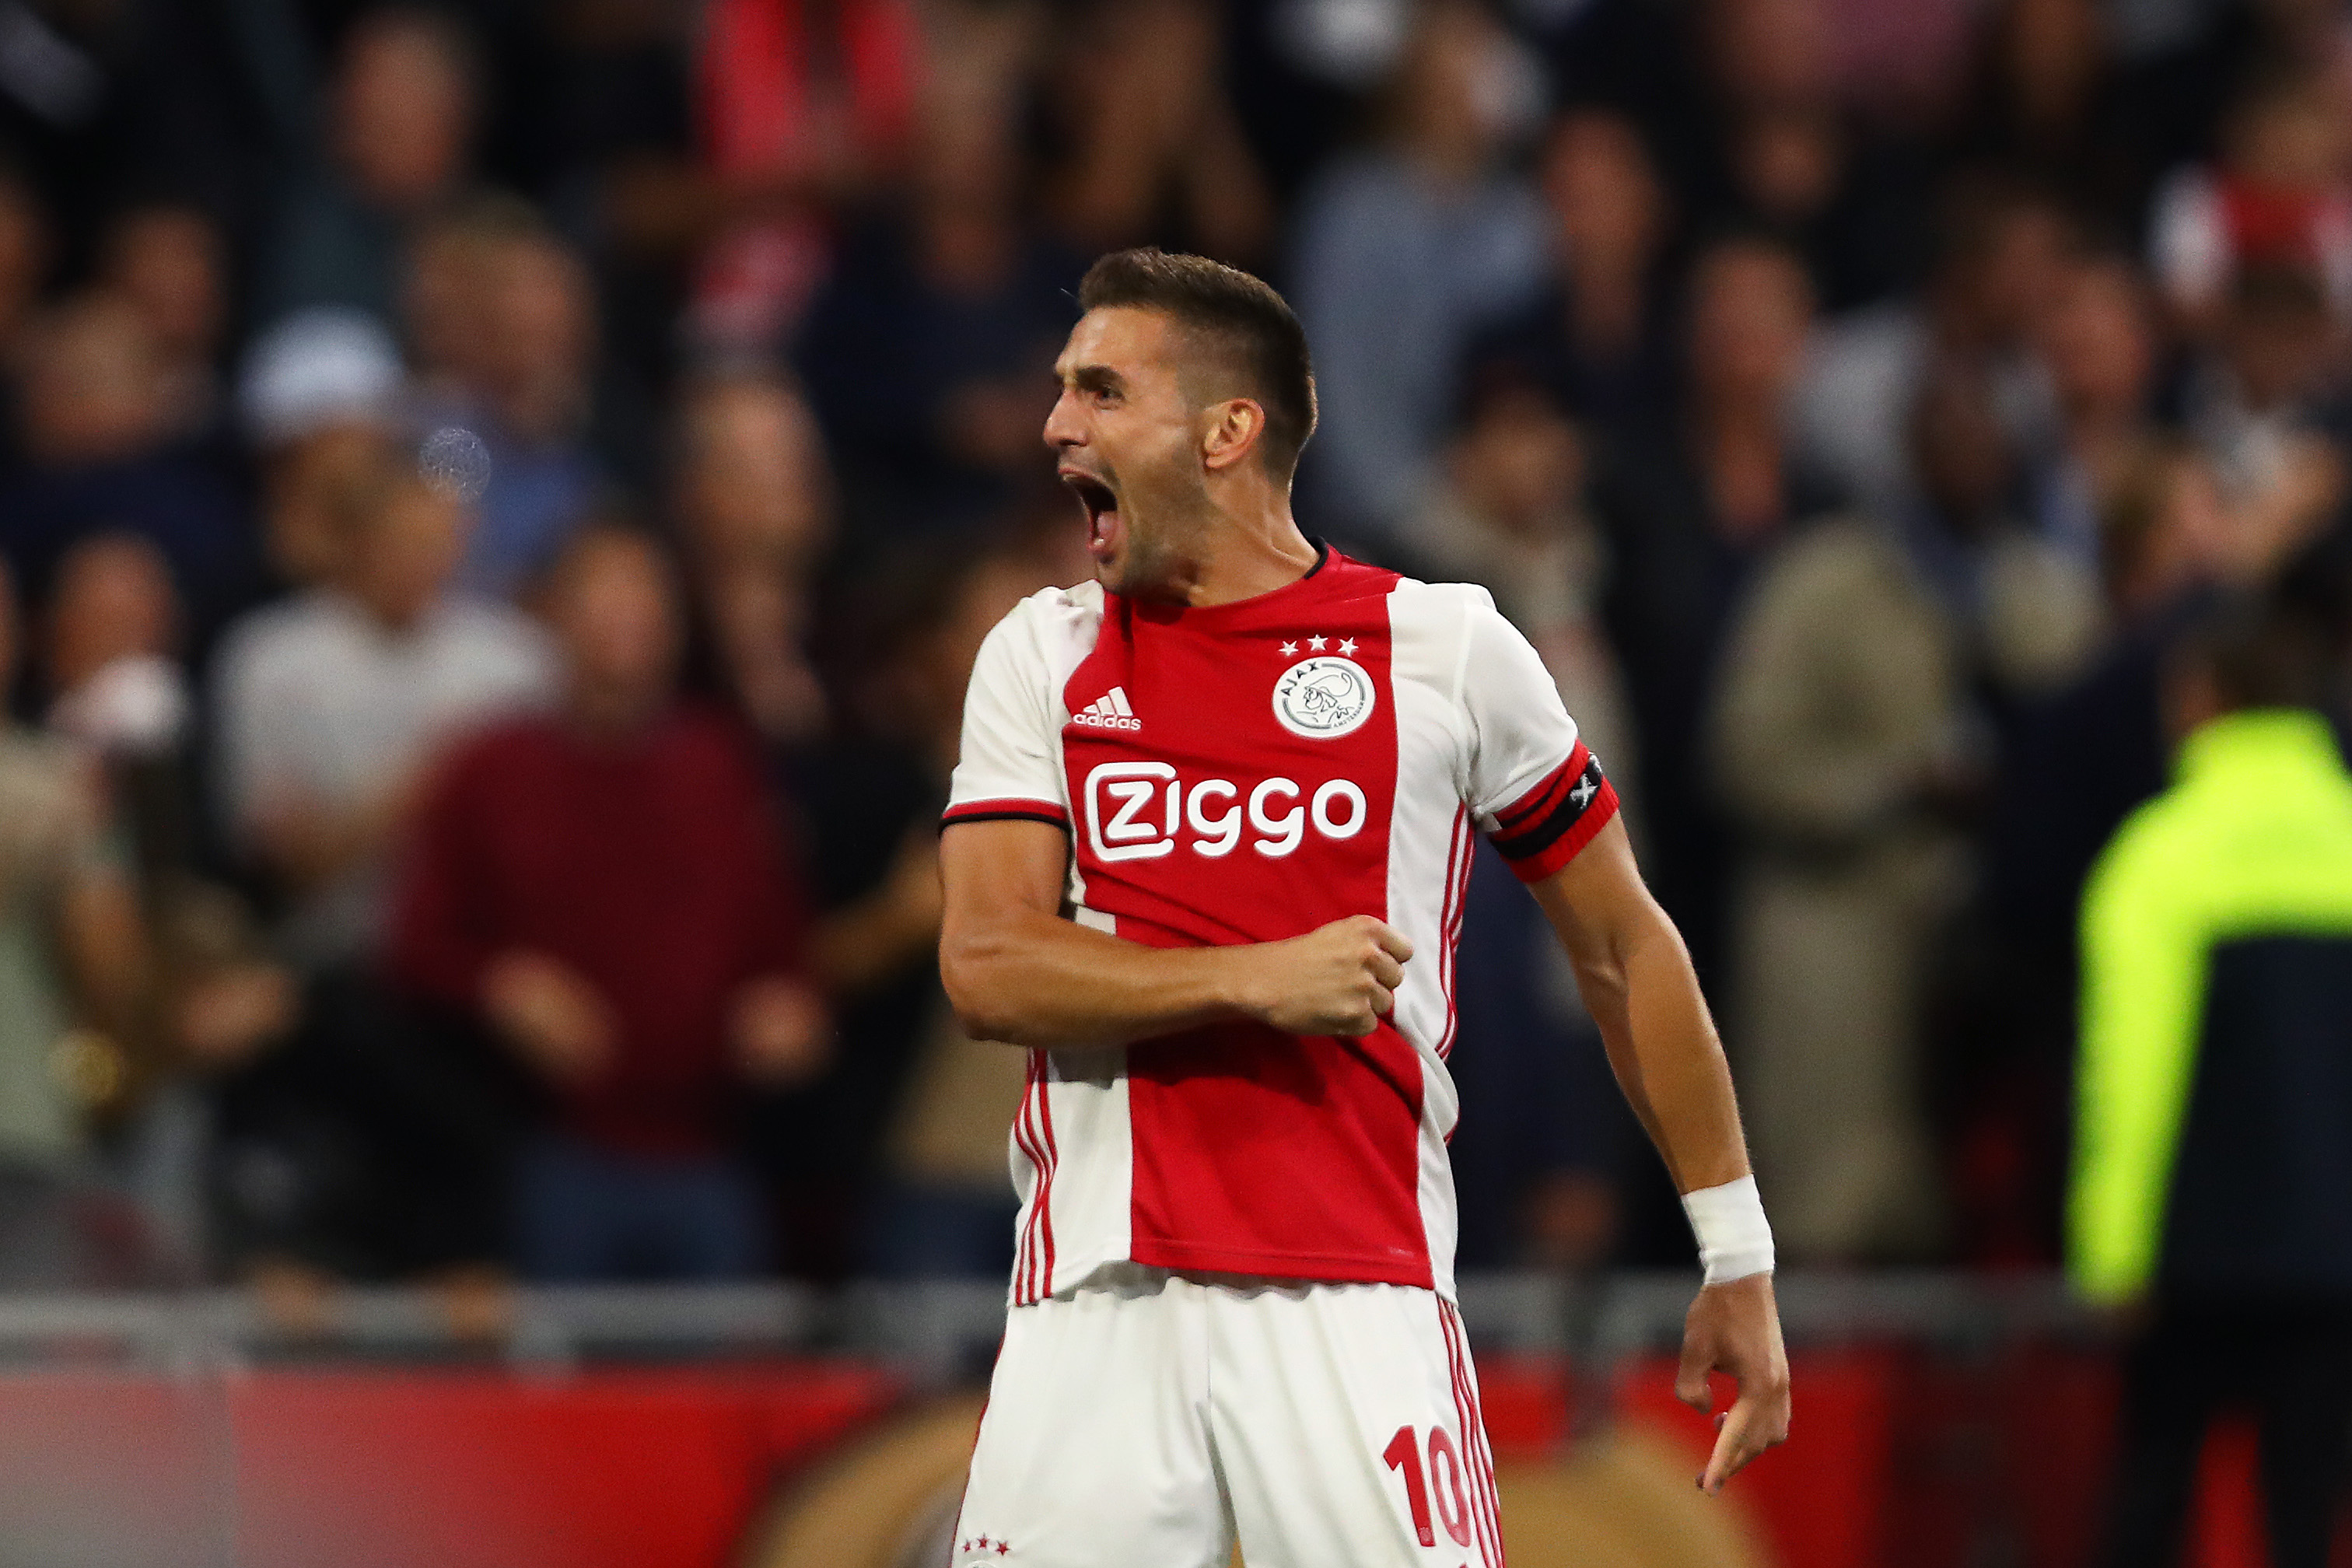 AMSTERDAM, NETHERLANDS - AUGUST 13: Dusan Tadic of Ajax celebrates scoring his sides third goal during the UEFA Champions League Third Qualifying Round match between Ajax and PAOK Saloniki at Johan Cruyff Arena on August 13, 2019 in Amsterdam, Netherlands. (Photo by Dean Mouhtaropoulos/Getty Images)